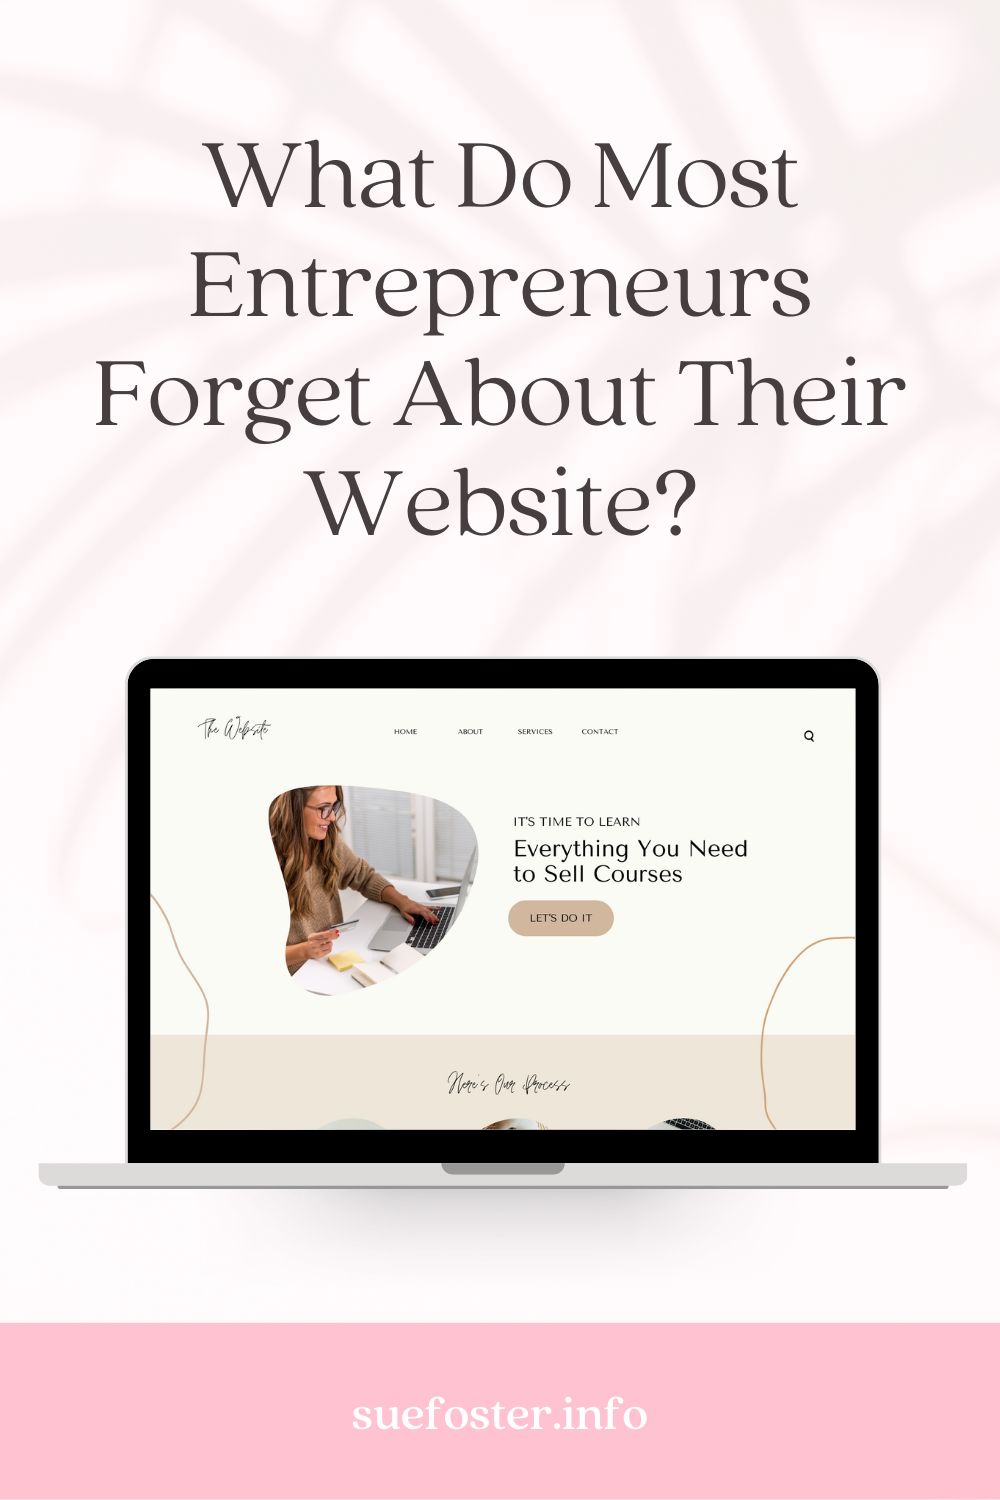 What-Do-Most-Entrepreneurs-Forget-About-Their-Website-1